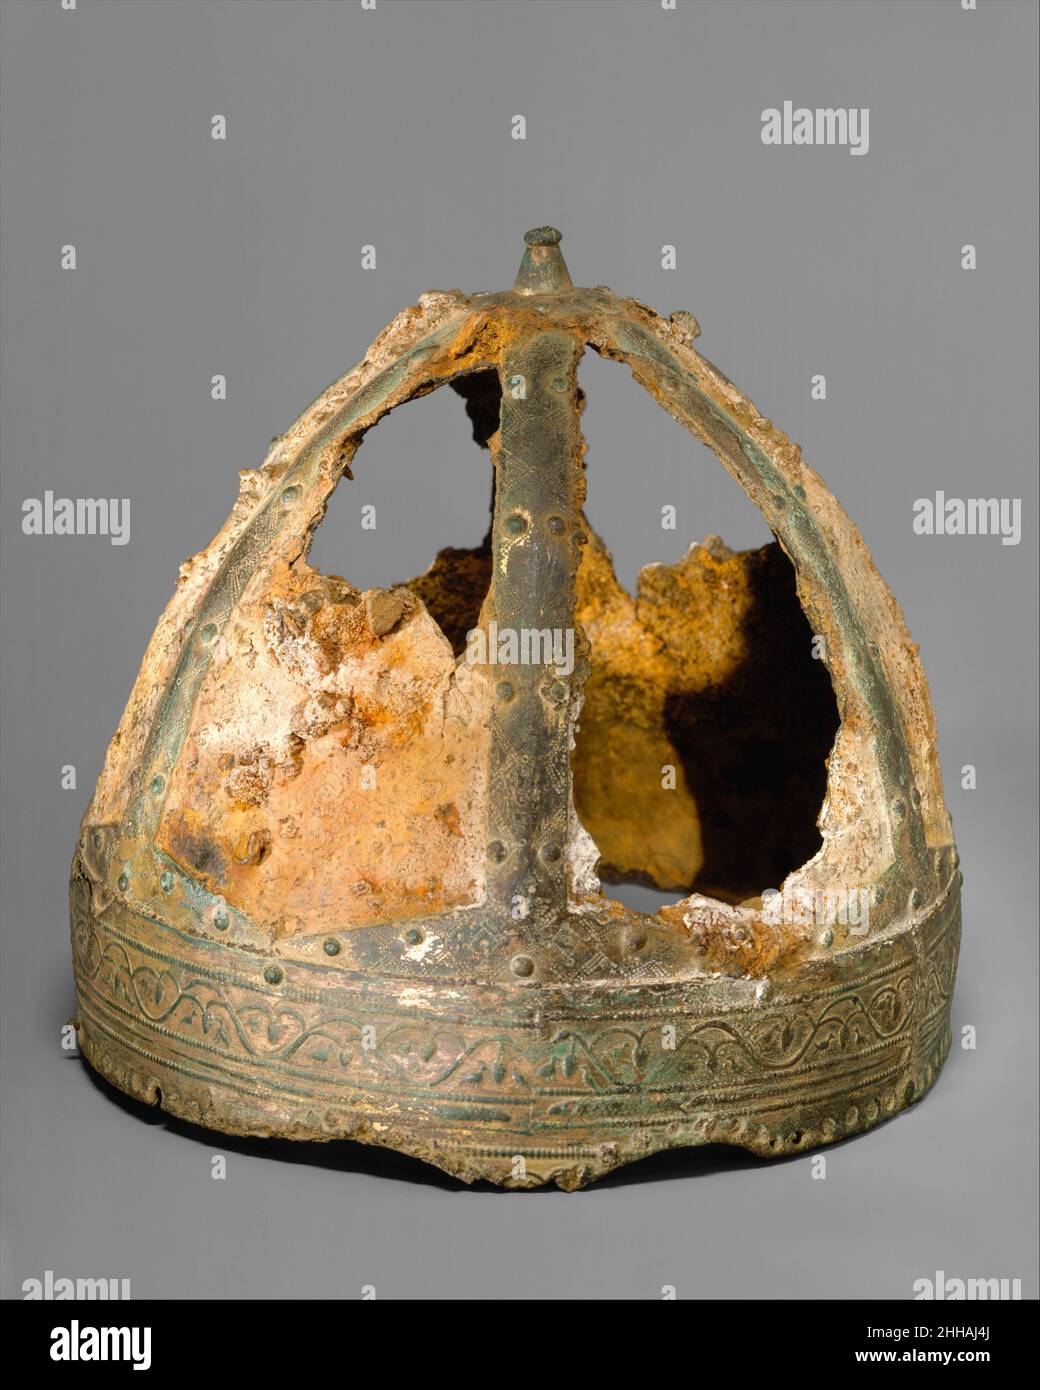 Helmet (Spangenhelm) 6th–7th century Byzantine or Germanic This helmet comes from a small group of closely related Spangenhelme (strap helmets). The sites where they have been found are widely scattered, ranging from Sweden to Germany, the Balkans and Libya. The Metropolitan Museum’s helmet was found in the Saône River near Trévoux, France. The quality of the helmets and their diverse find sites suggest that they were made as diplomatic gifts to foreign rulers, perhaps sent from the Byzantine court or from the Ostrogothic kingdom in Italy.All the helmets originally had metal cheek pieces, a ma Stock Photo